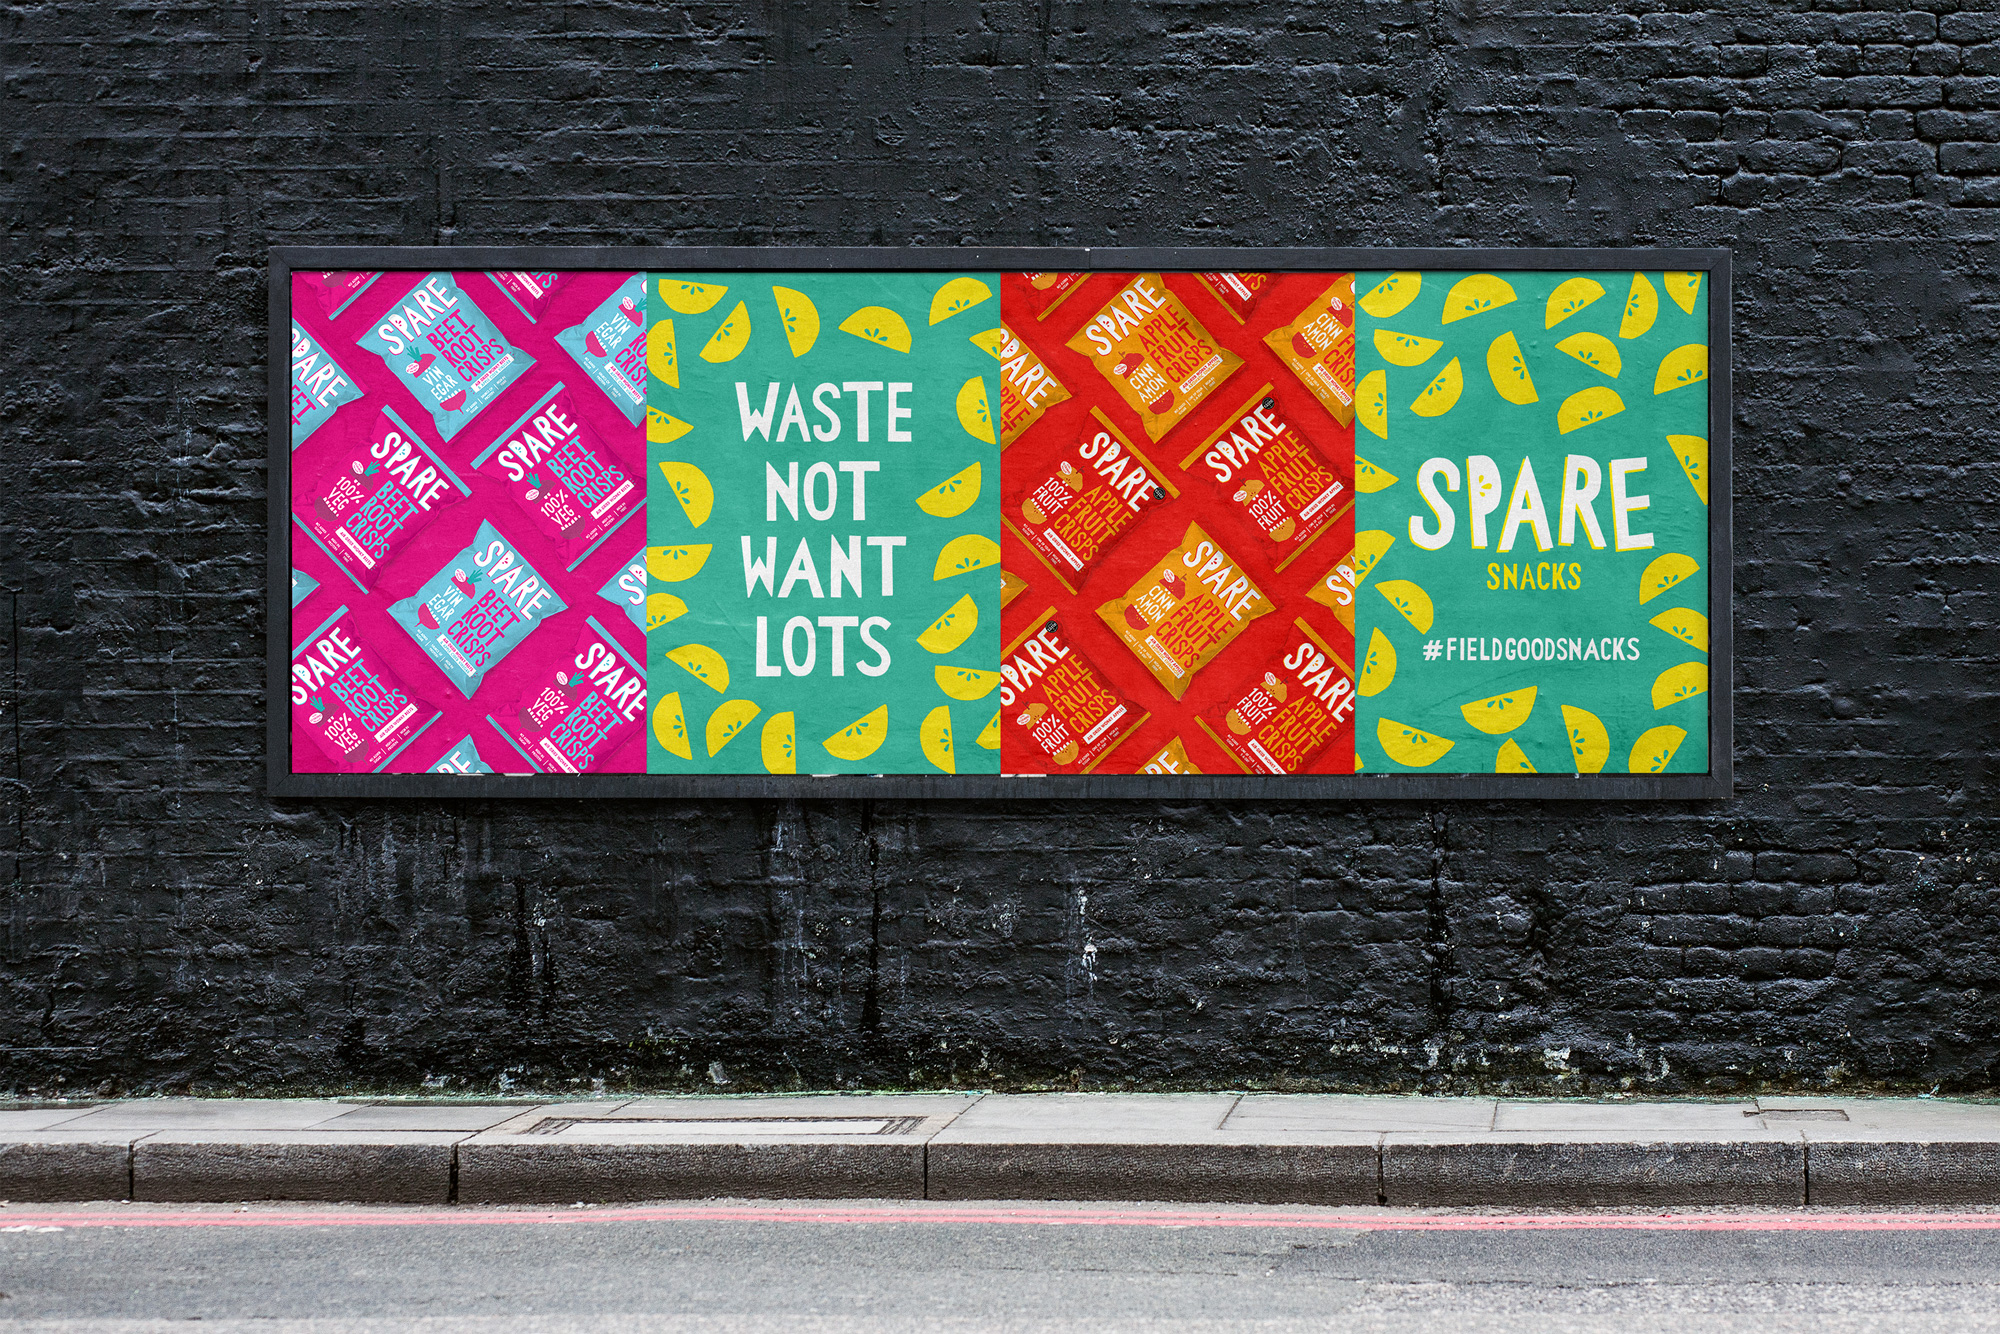 New Logo and Packaging for Spare Snacks by The Clerkenwell Brothers